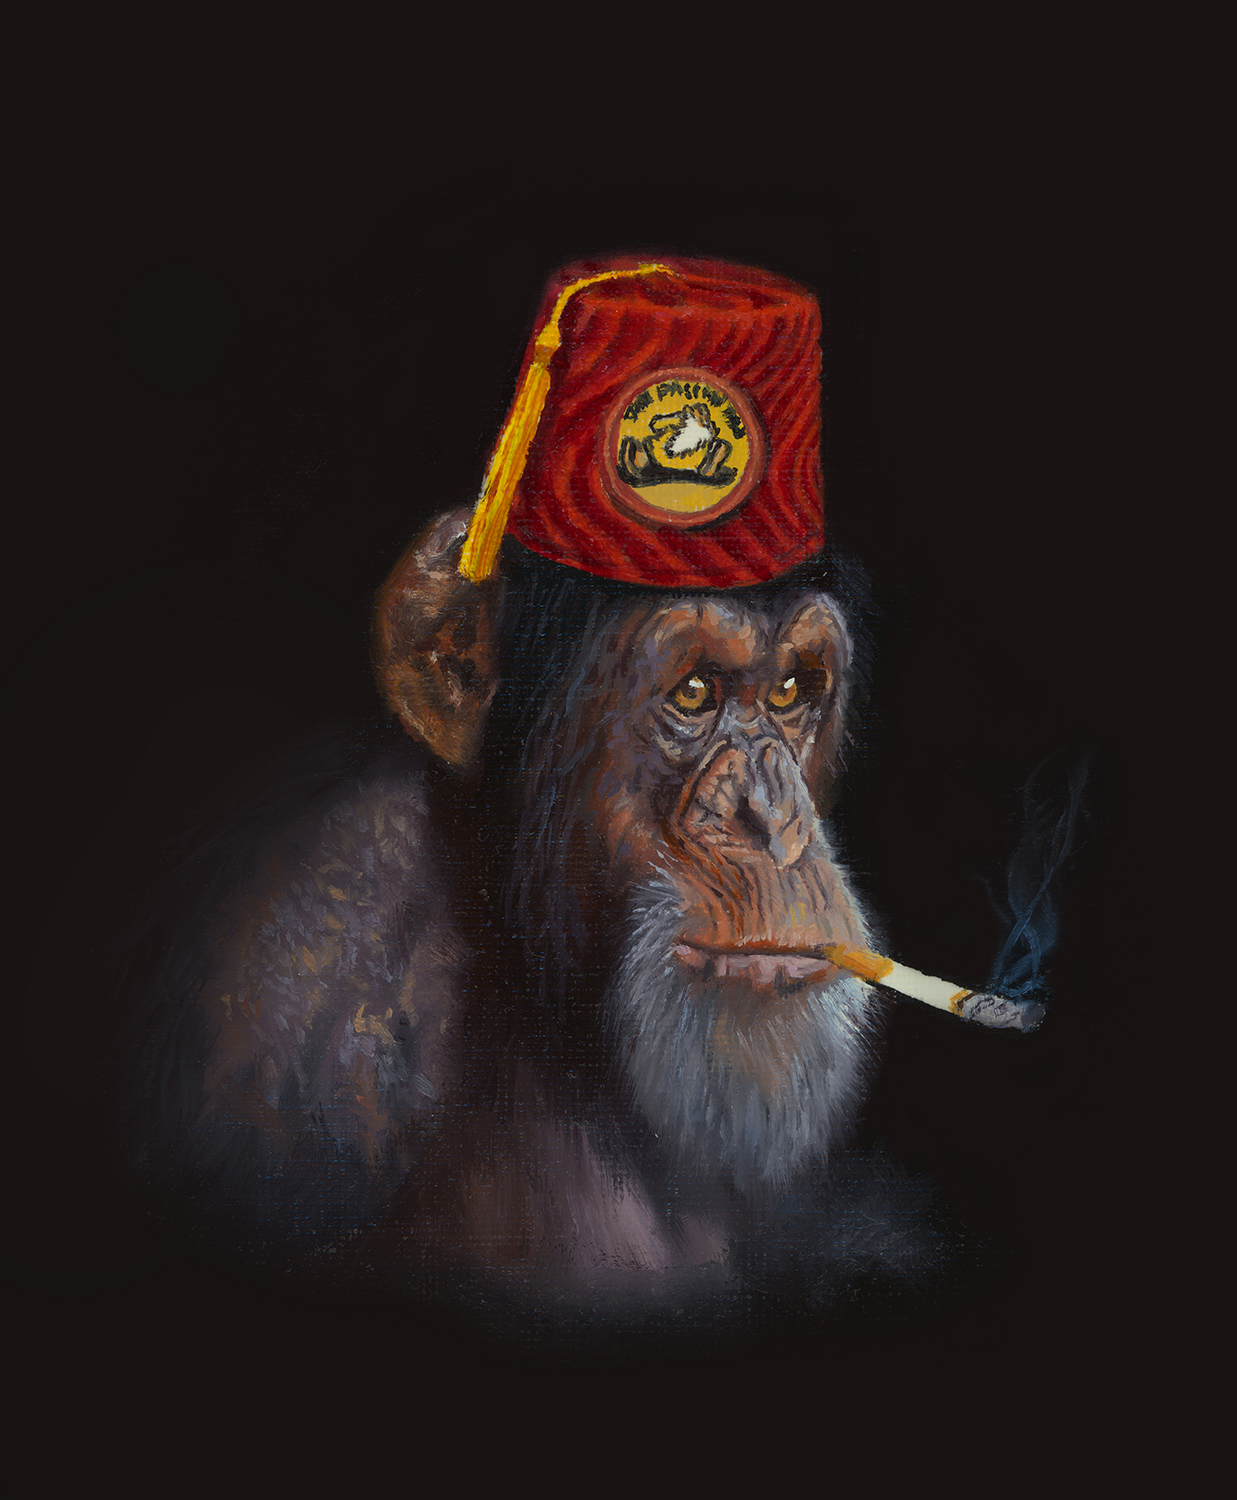 A monkey wearing a fez hat and smoking a cigarette - Tony South - Just Passin Thru